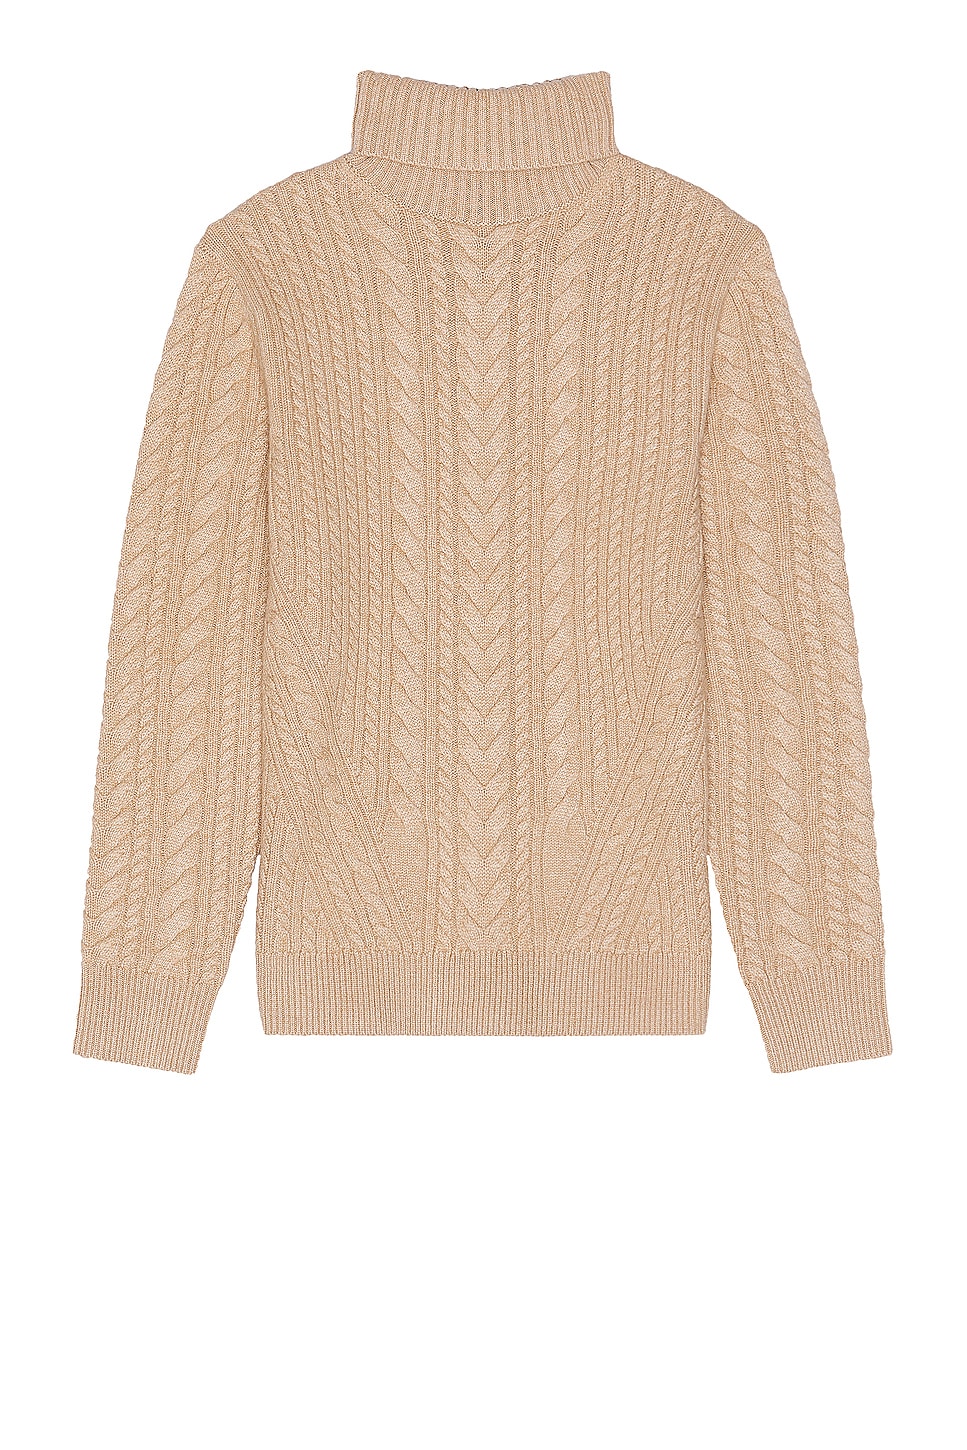 Image 1 of SIMKHAI Ajax Turtleneck Cable Sweater in Driftwood